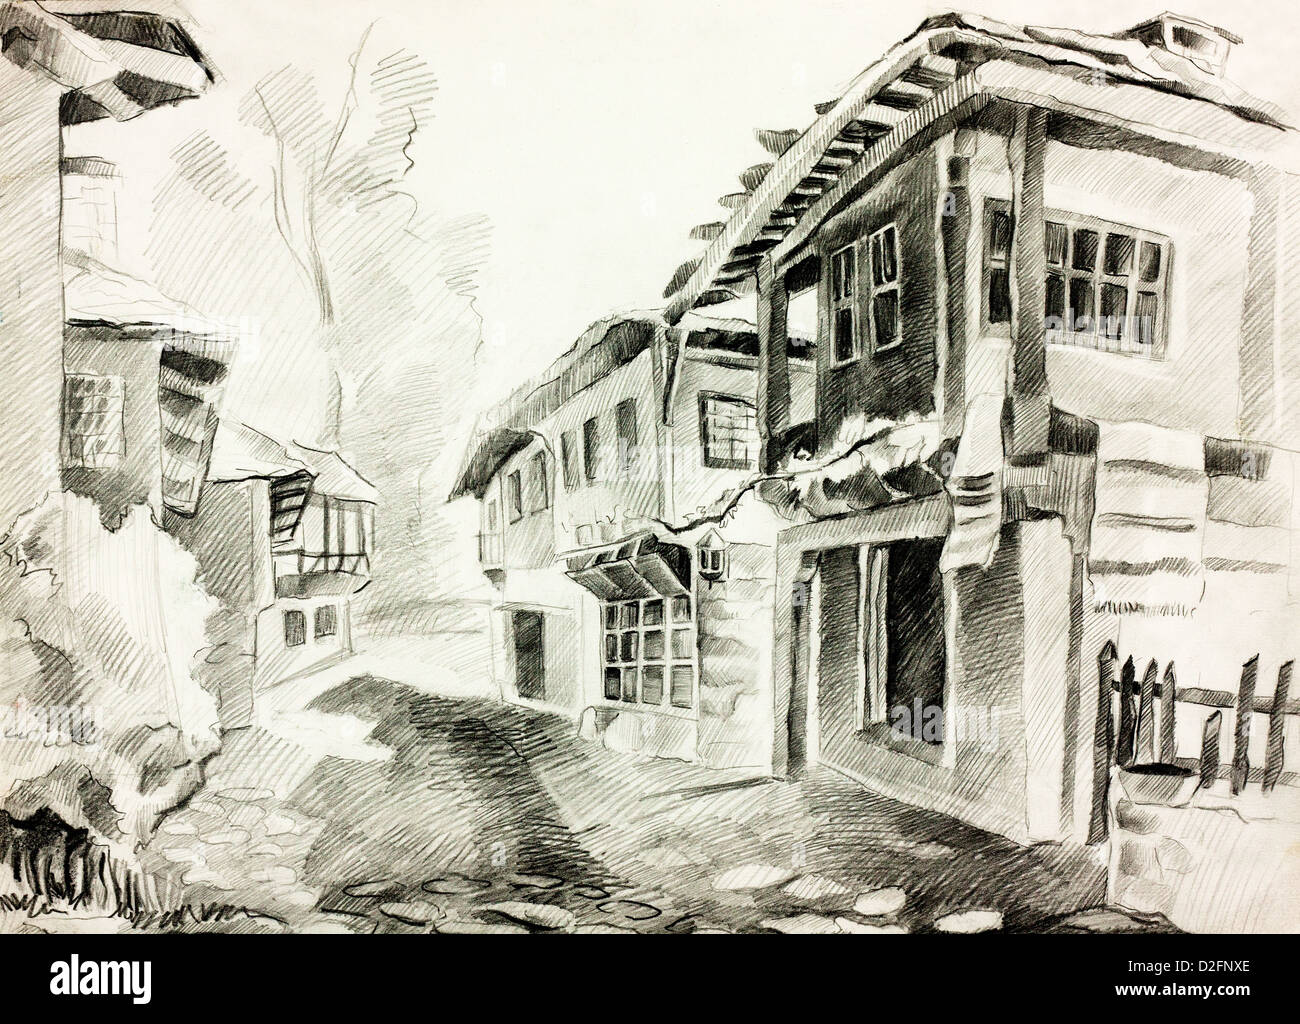 Premium Photo | Sketch of narrow street with old buildings in china